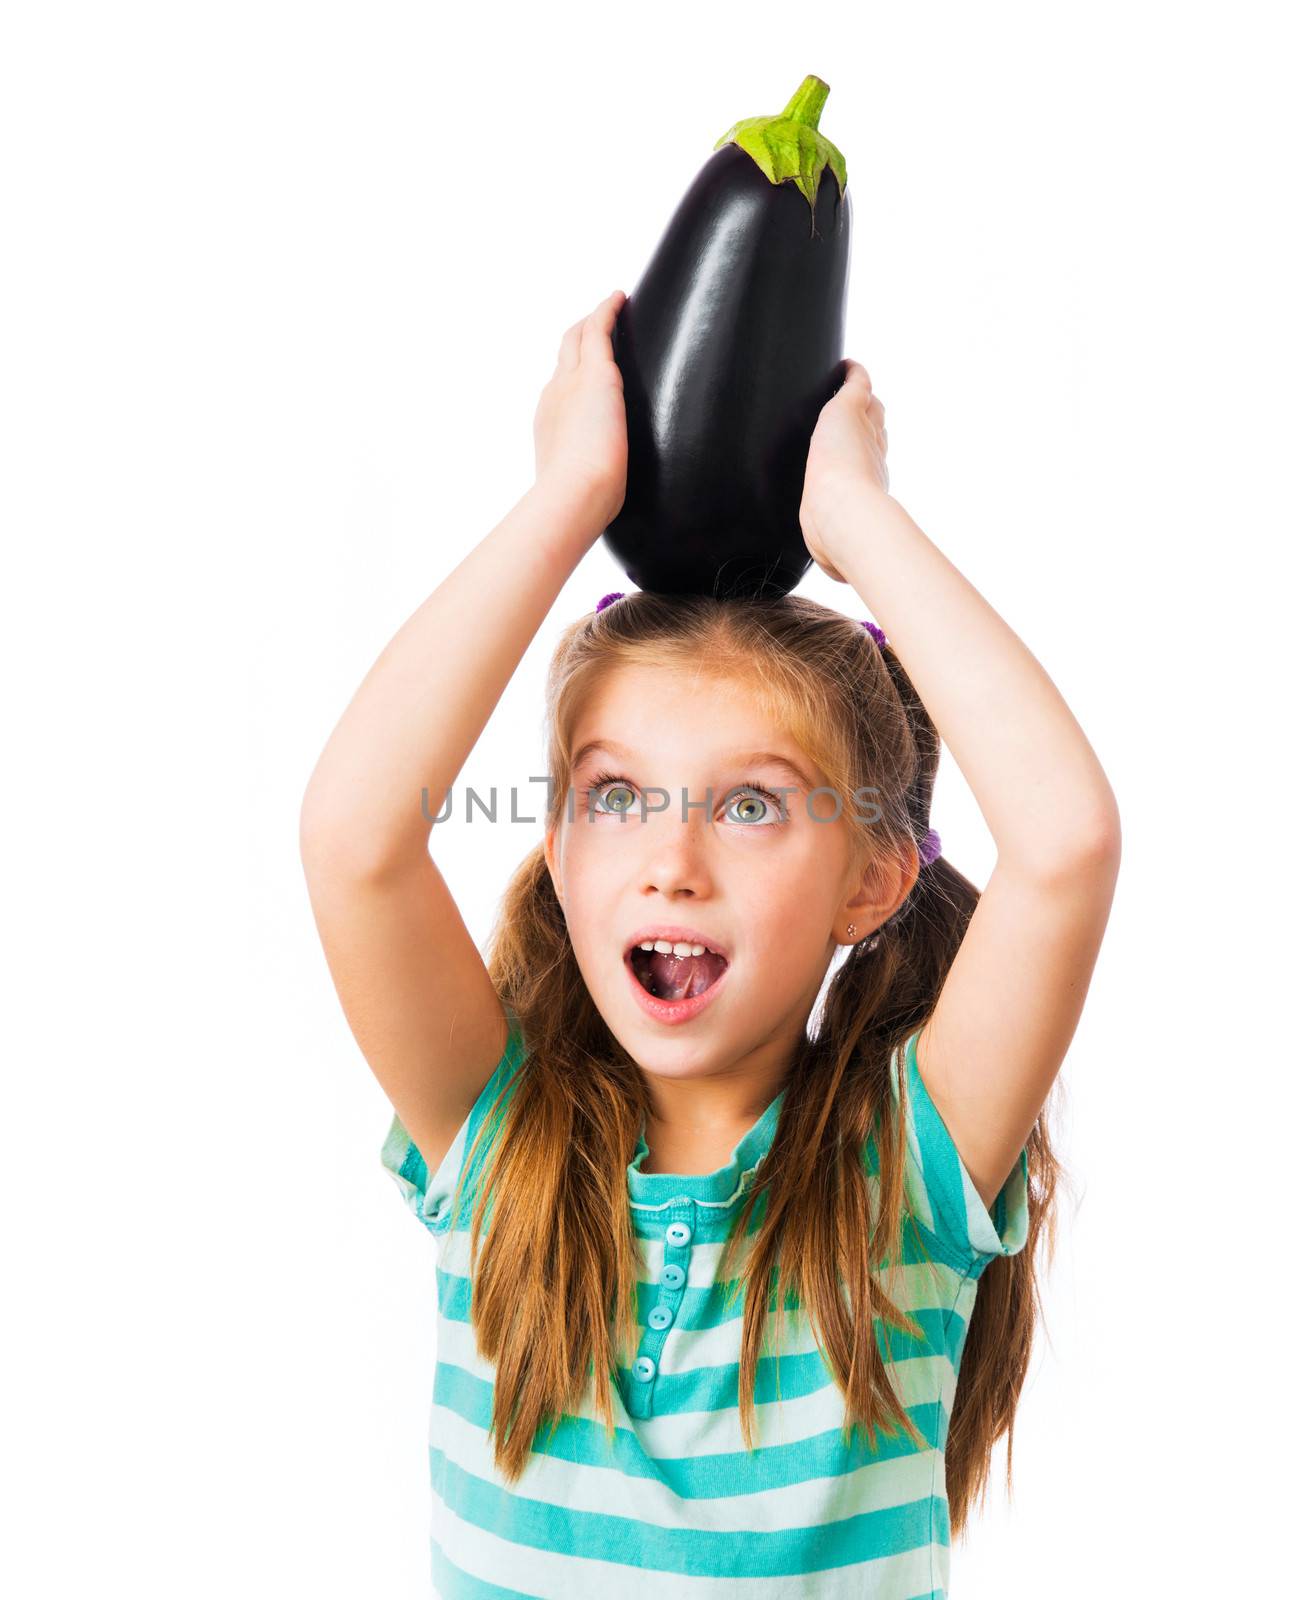 little girl with eggplant by GekaSkr